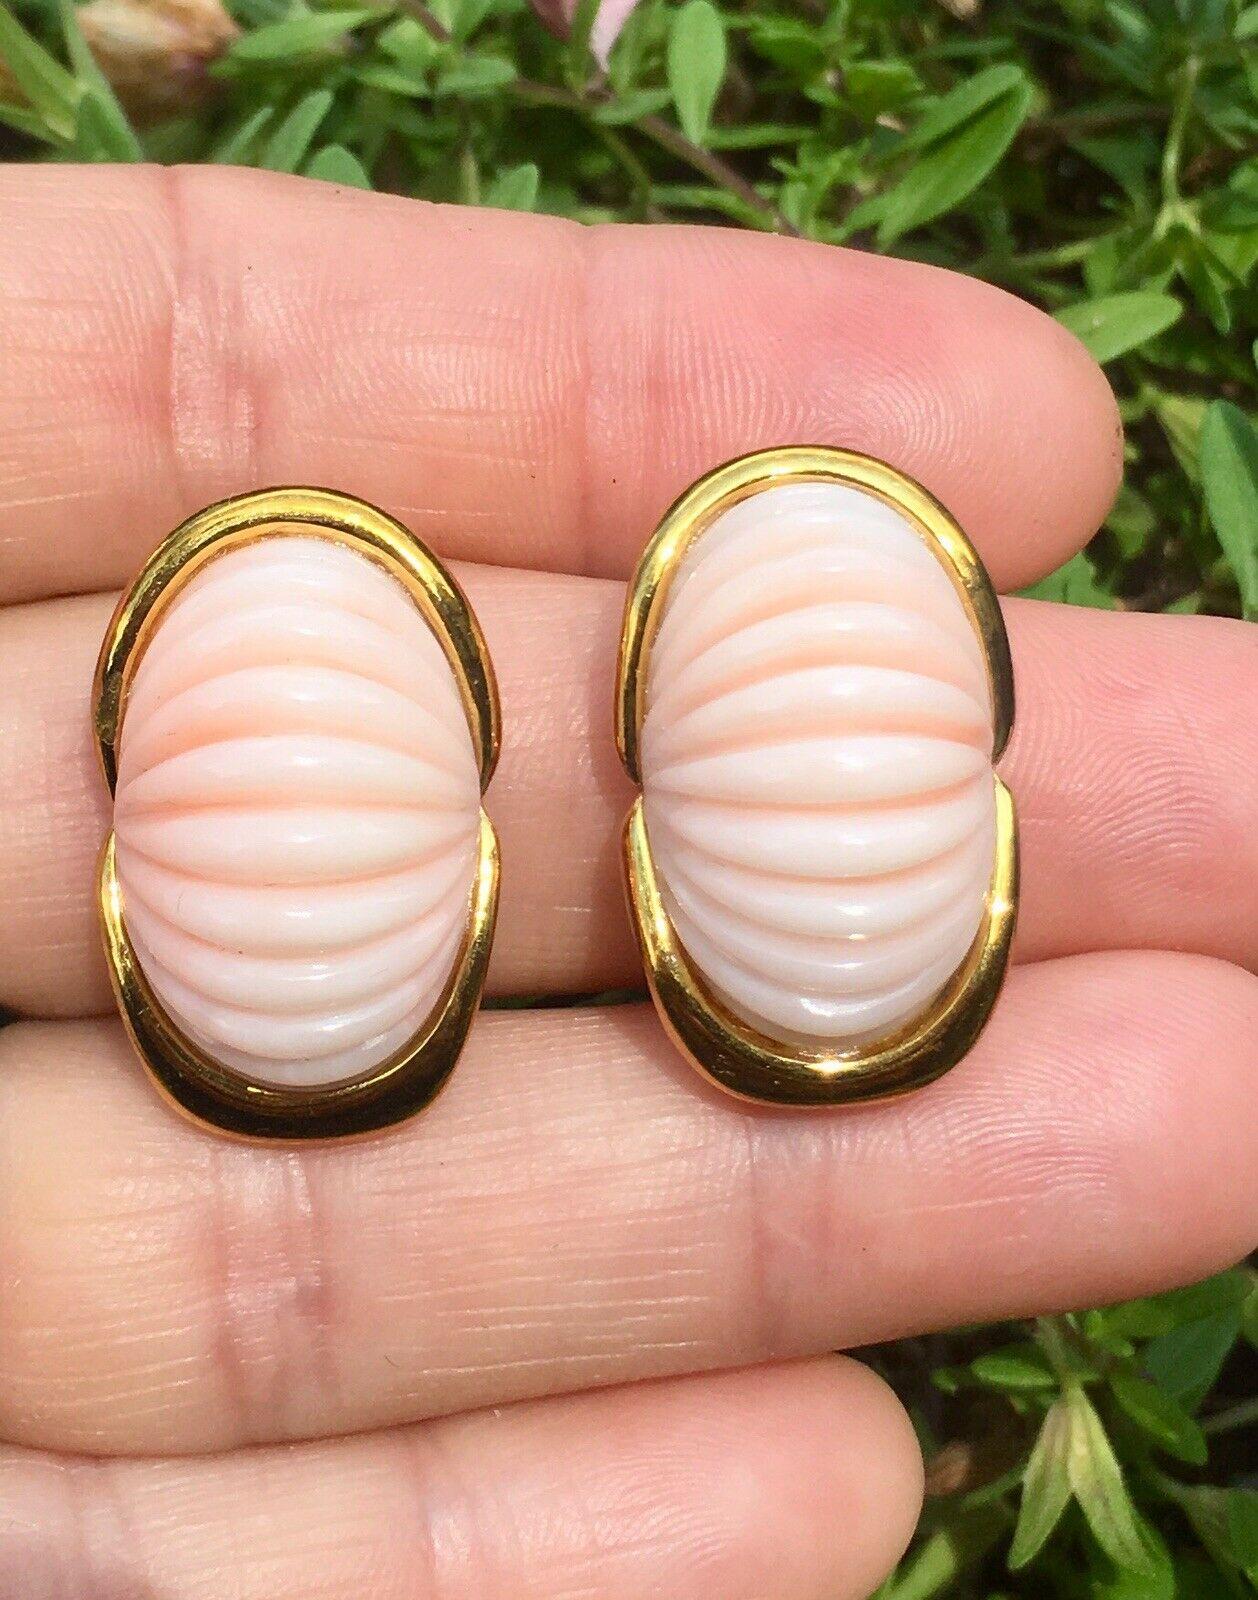 These beautiful Trio designer earrings feature two stunning large carved angel skin coral cabochons set in a beautiful framework of 14 karat gold.  The earrings are marked “14k” for gold purity on the back of the piece, as well as the designer